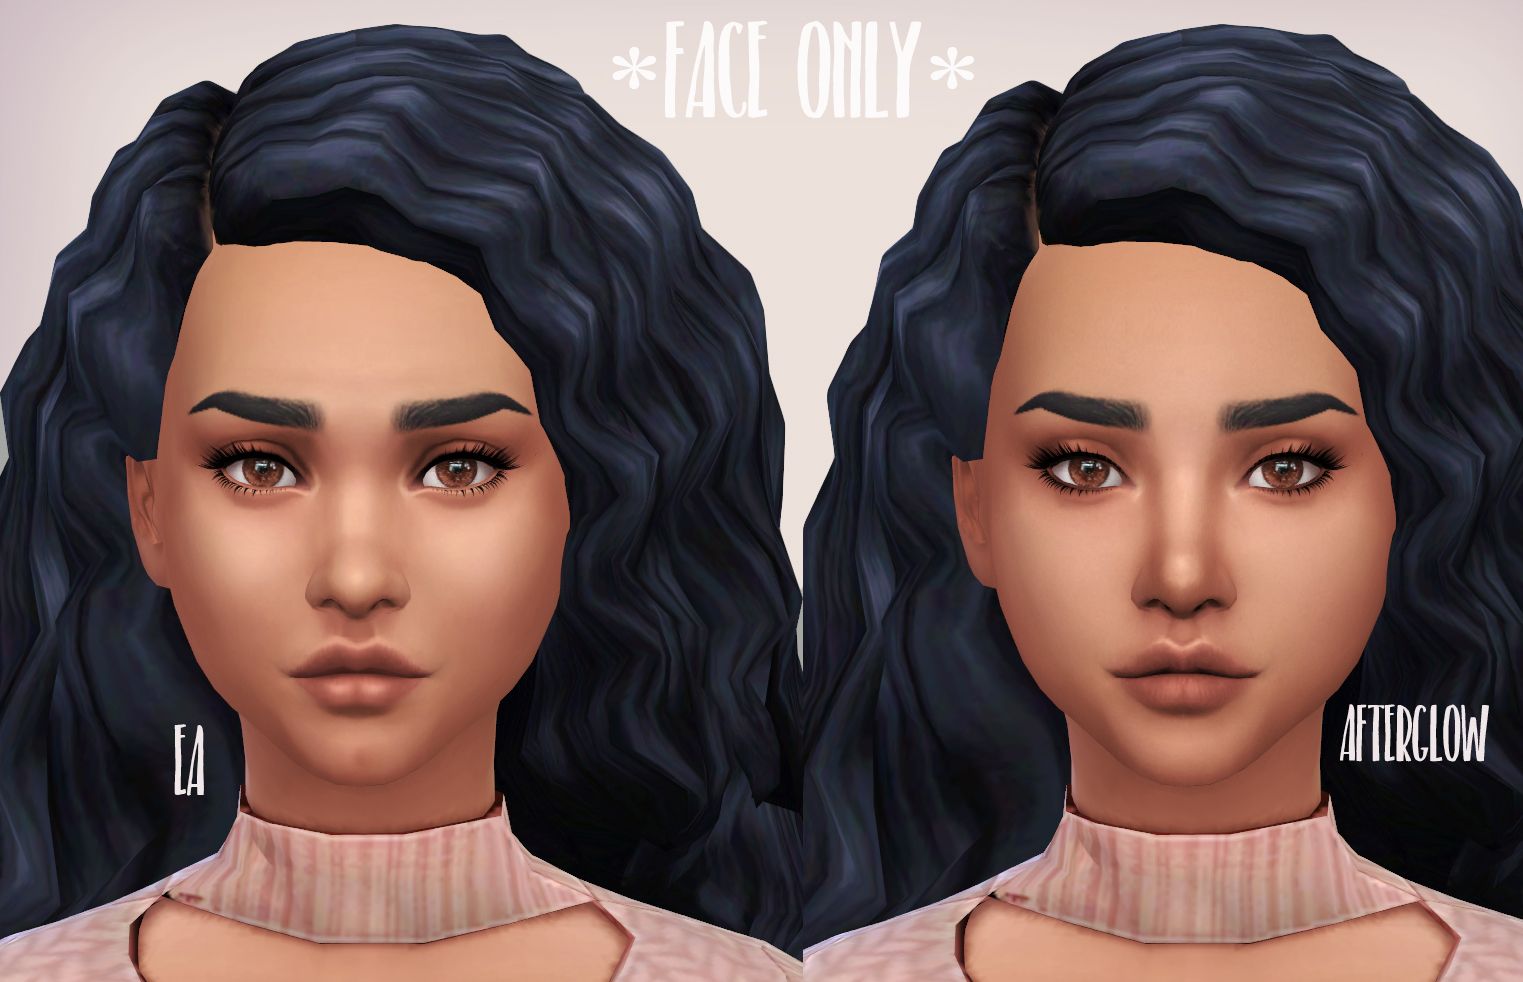 sims 4 default nude skin replacement